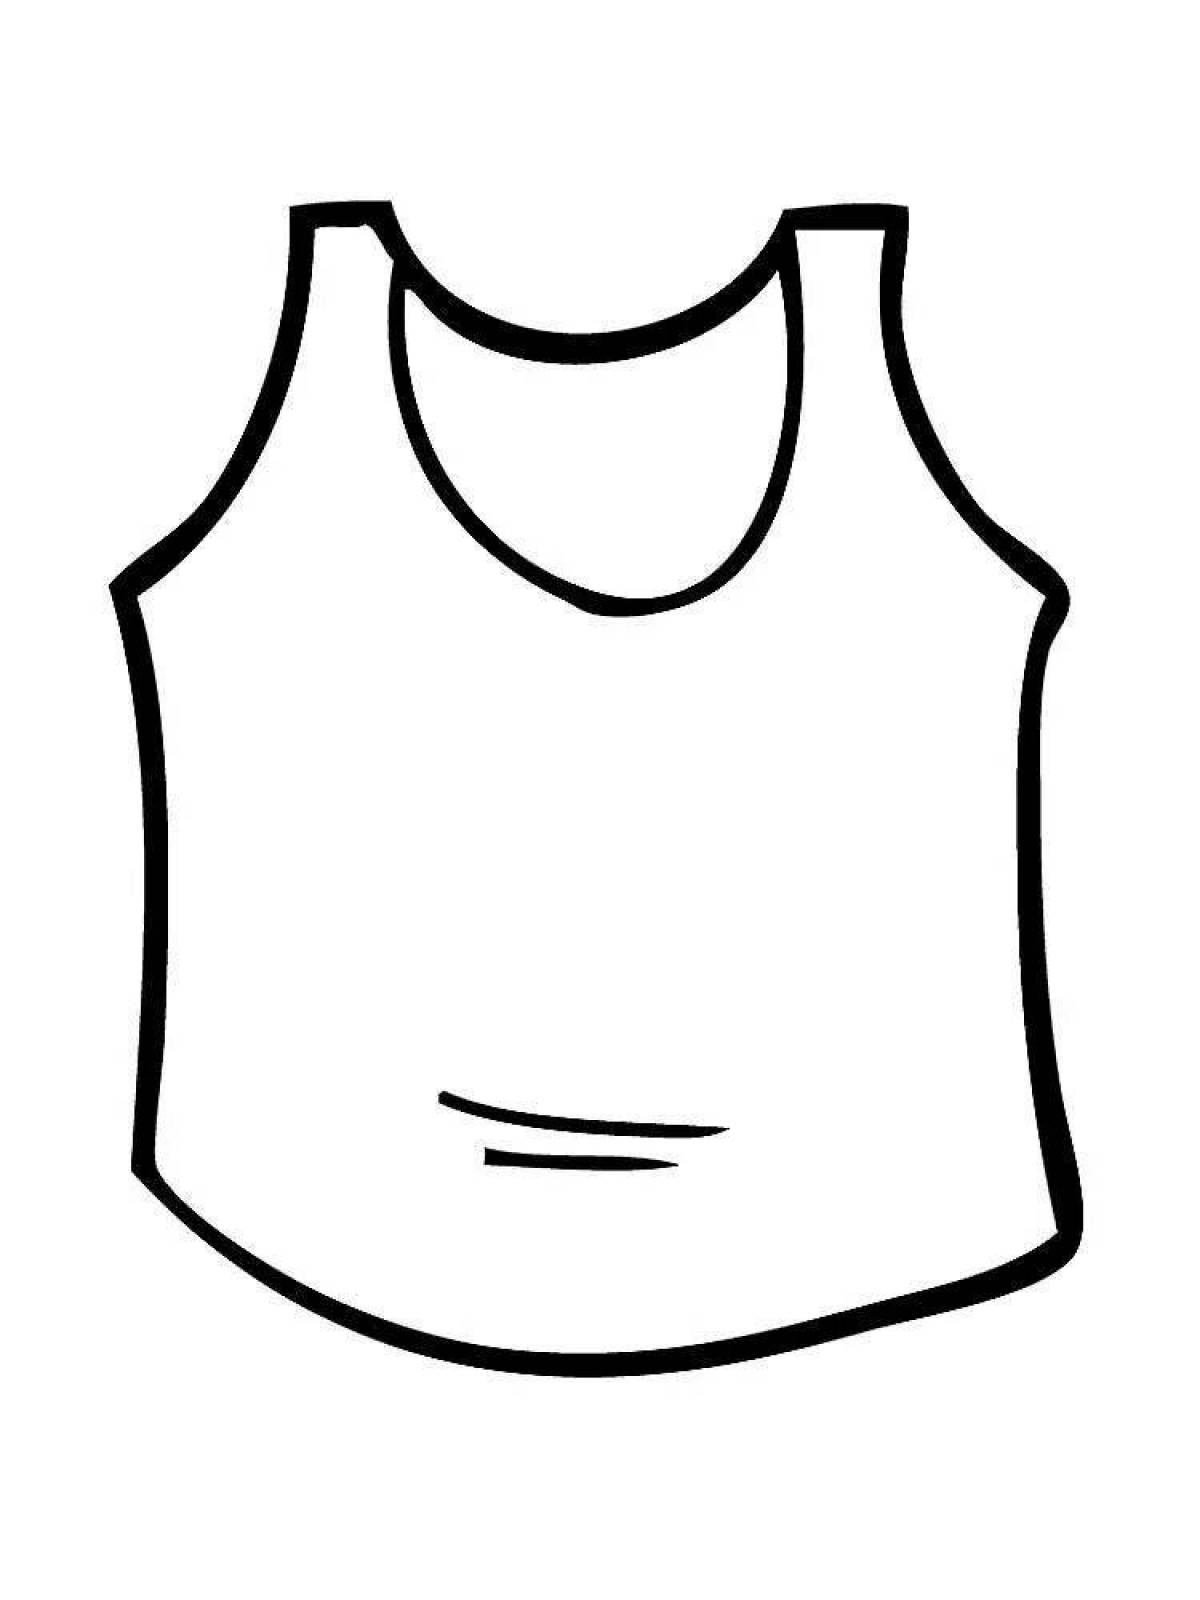 T-shirt coloring page